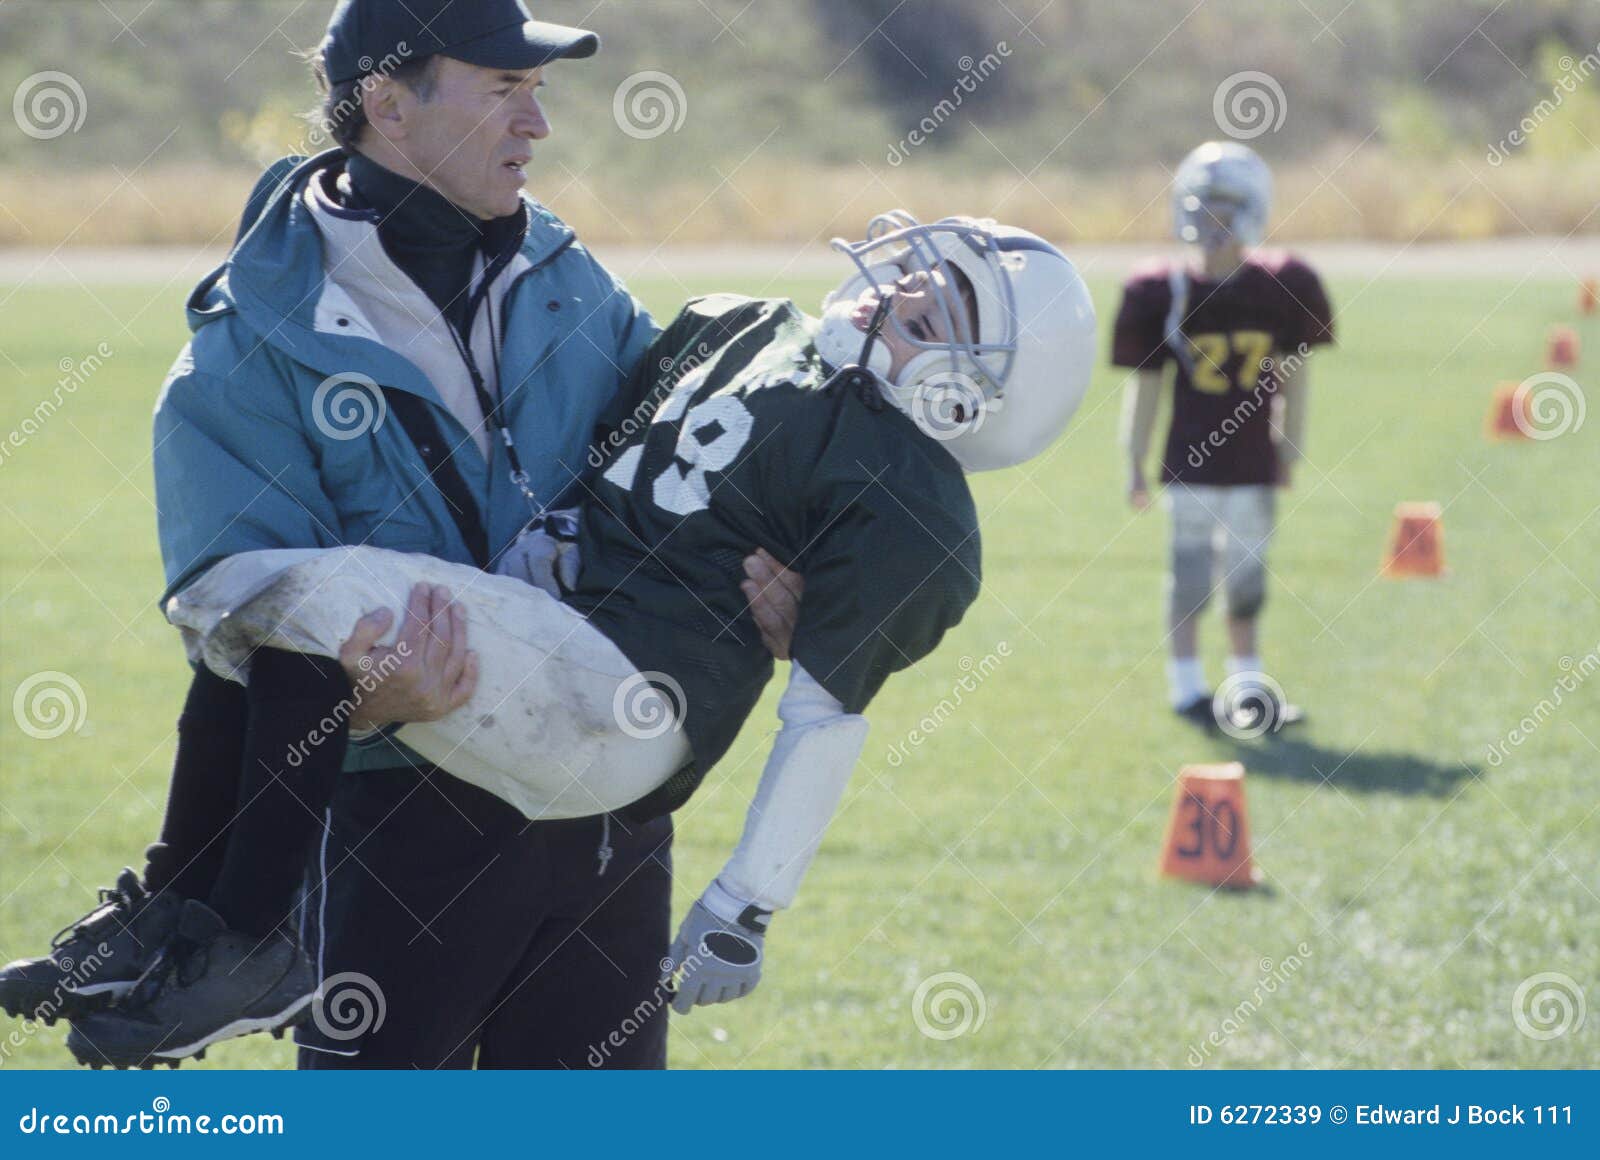 Little League Coach with Injured Football Player Stock Image - Image of  junior, lifting: 6272339